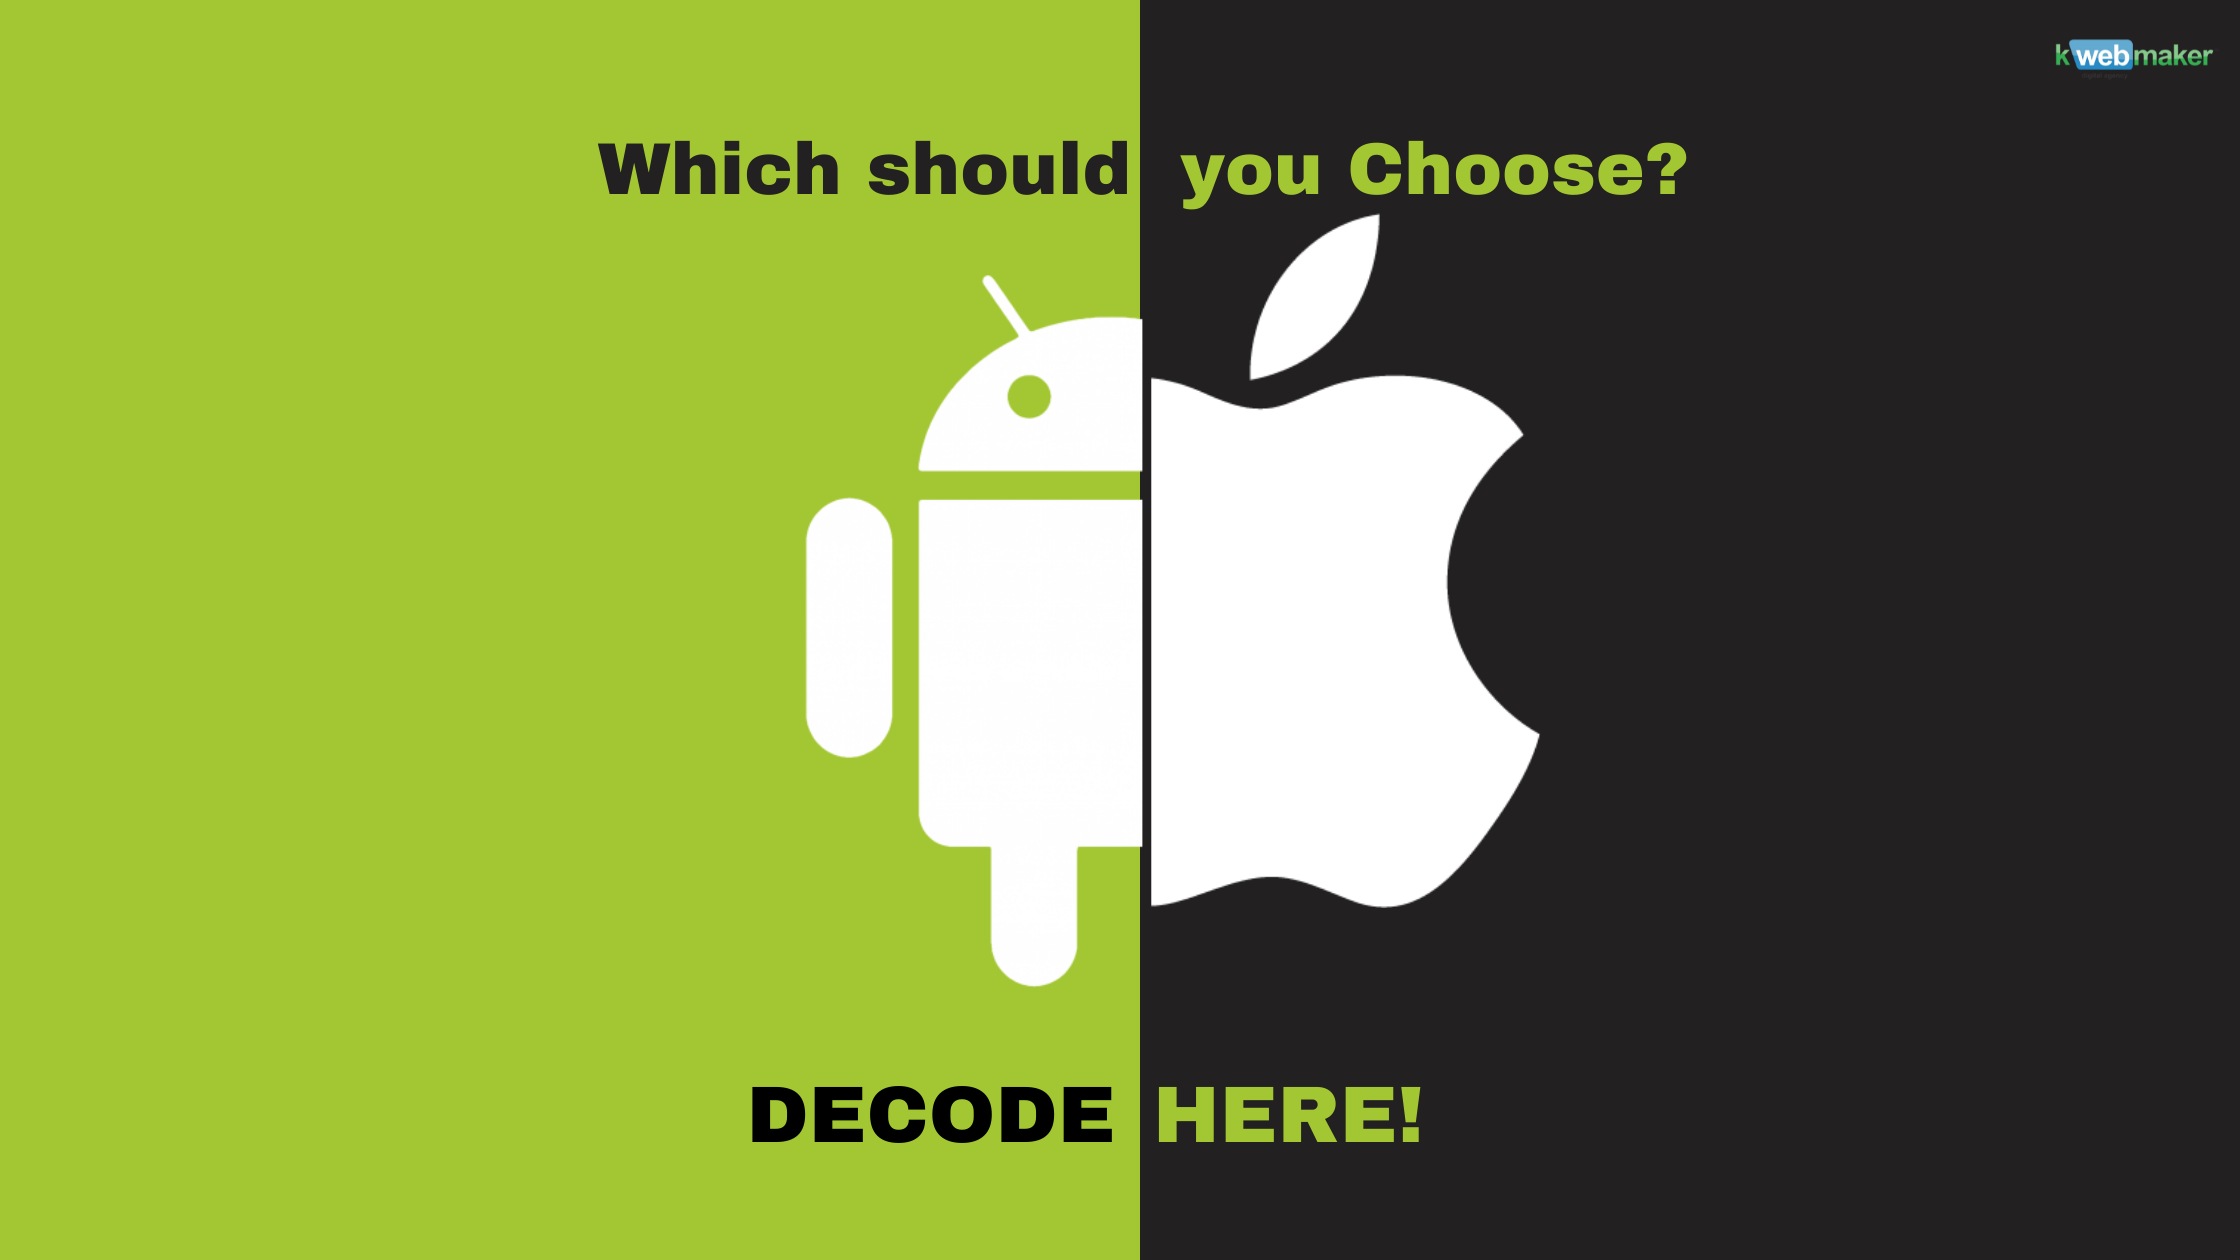 All you need to know about IOS vs Android